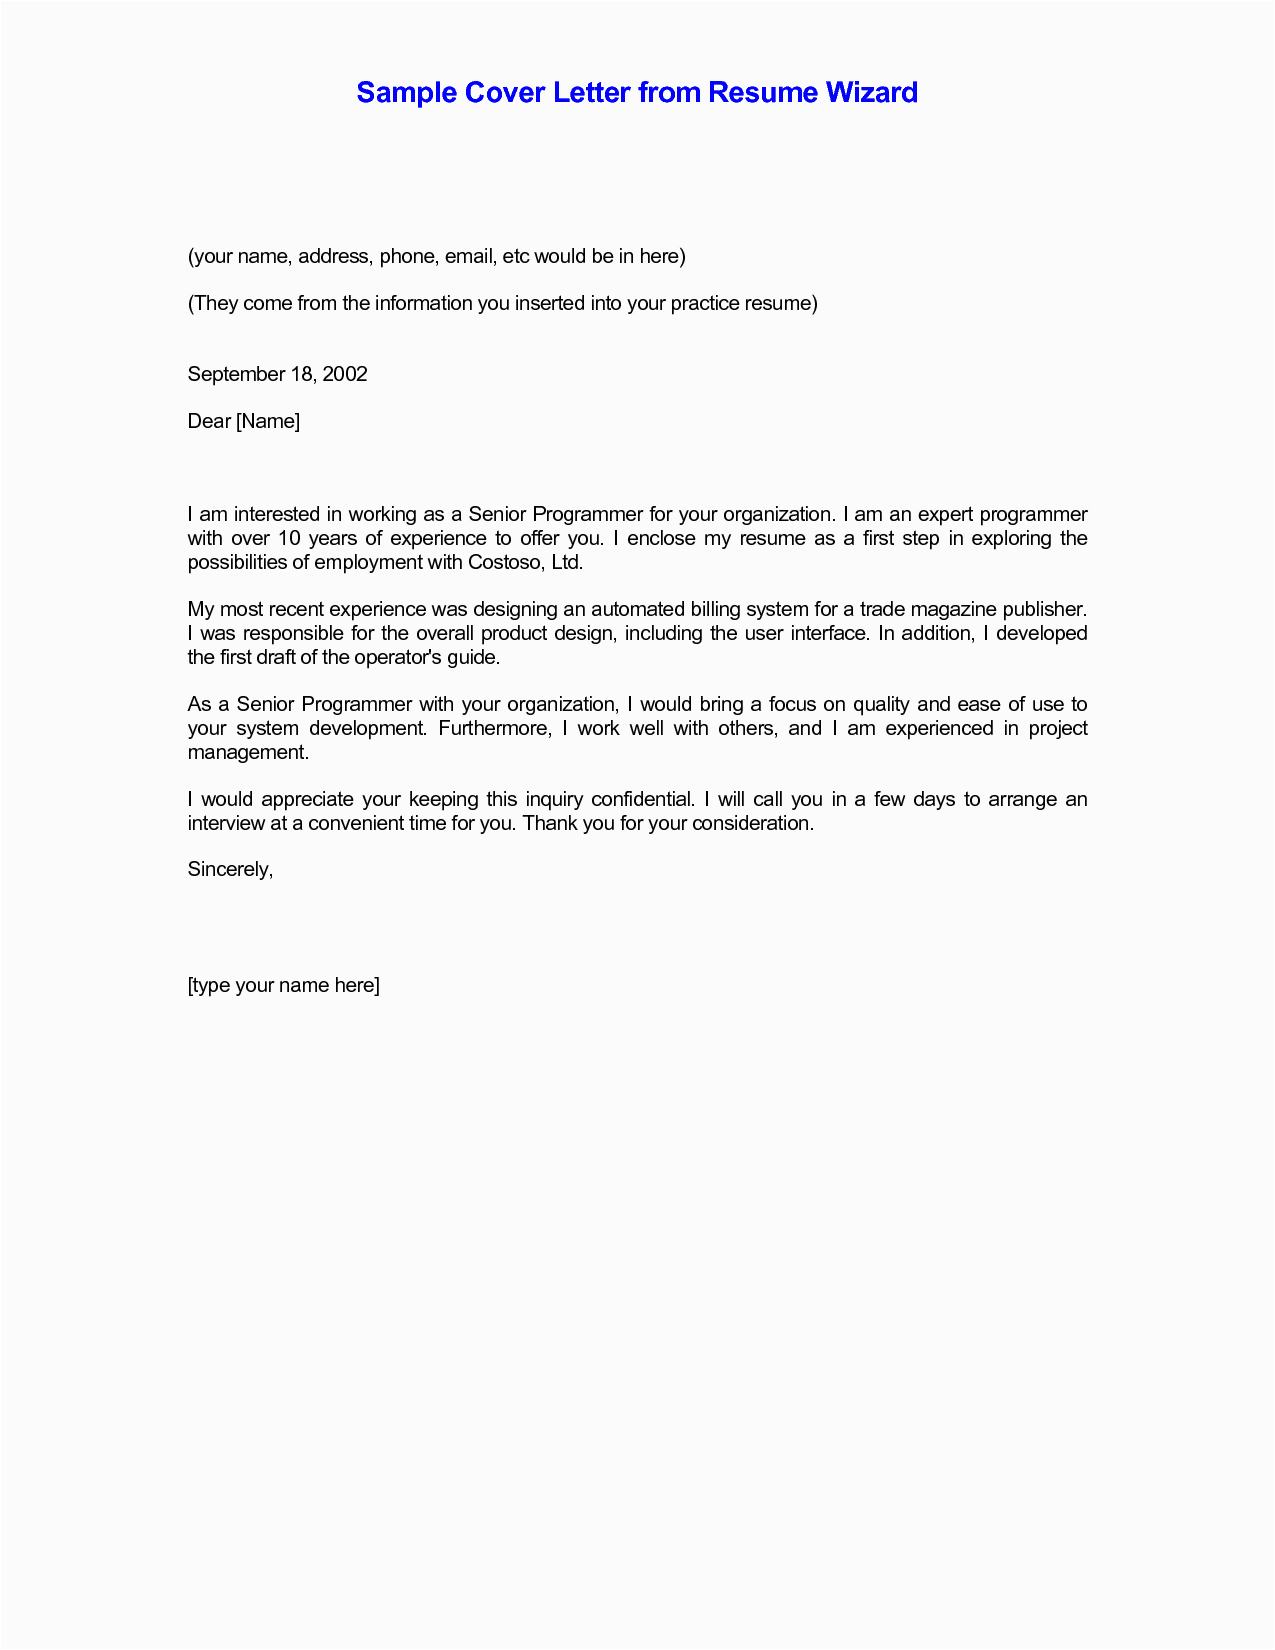 Sample Cover Letter with attached Resume Cover Letter for Resume